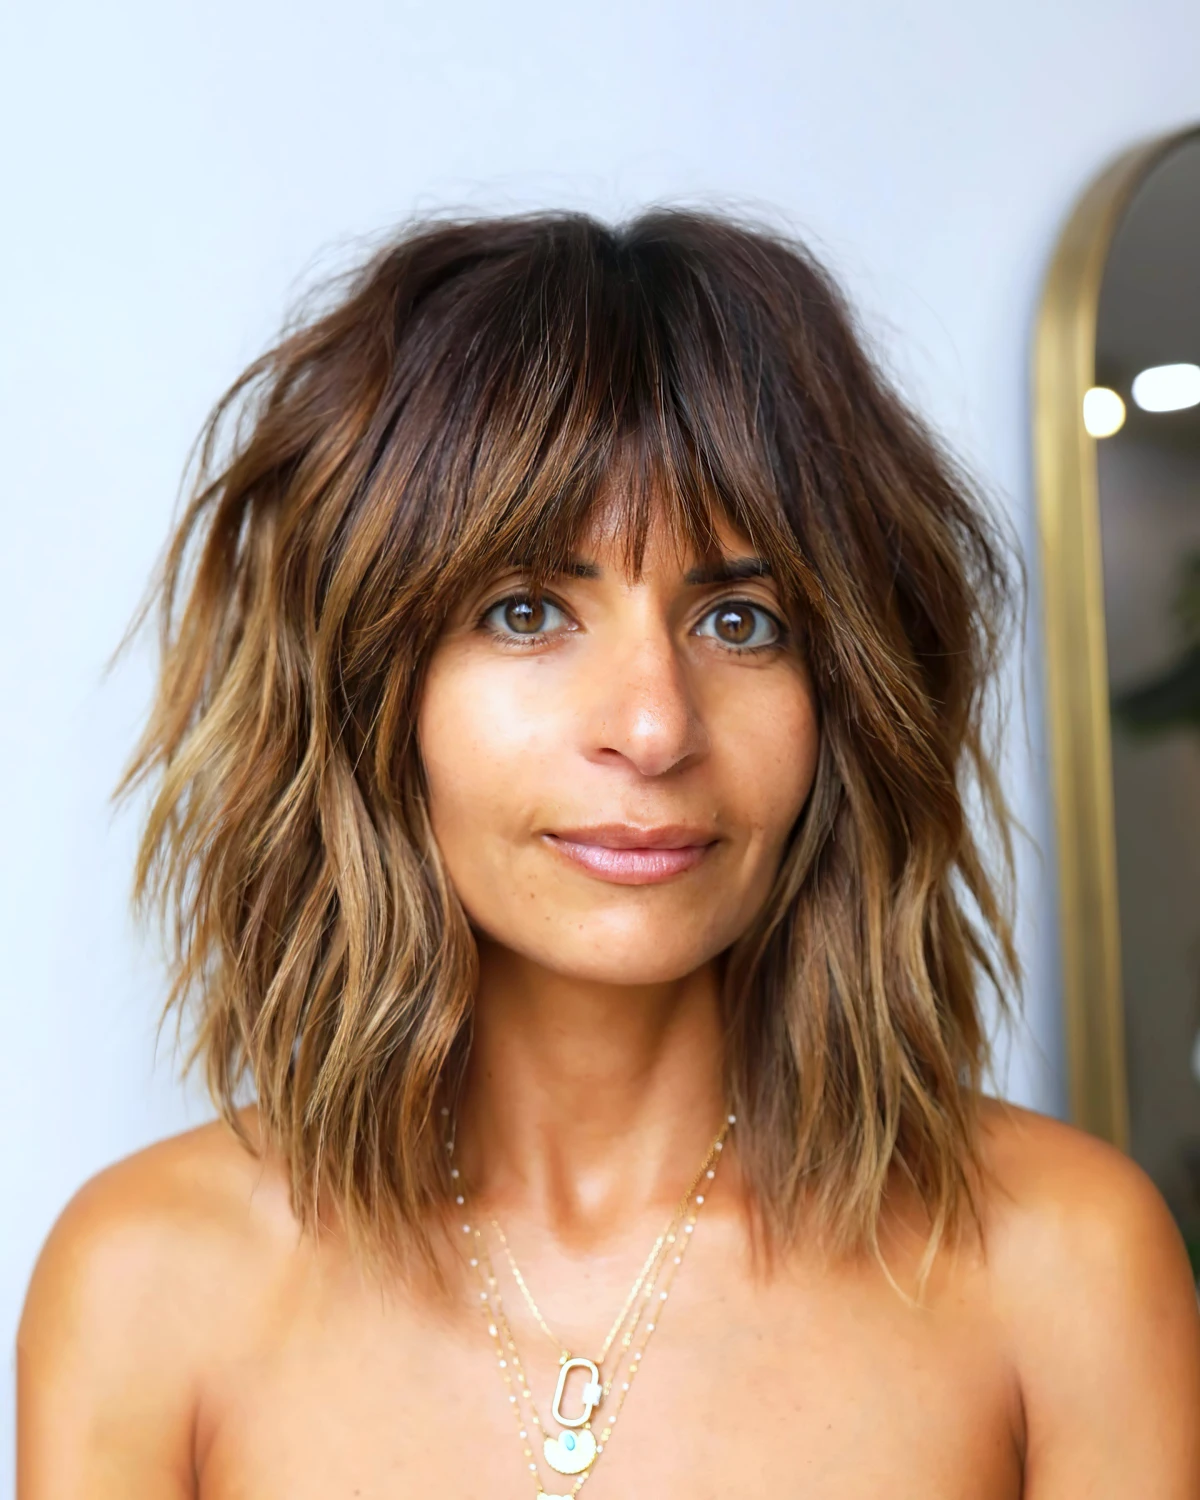 1706195962 2 6 mid short gradient haircuts for women aged 60 to look.webp - 6 mid-short gradient haircuts for women aged 60 to look younger!  Hair trends of 2024